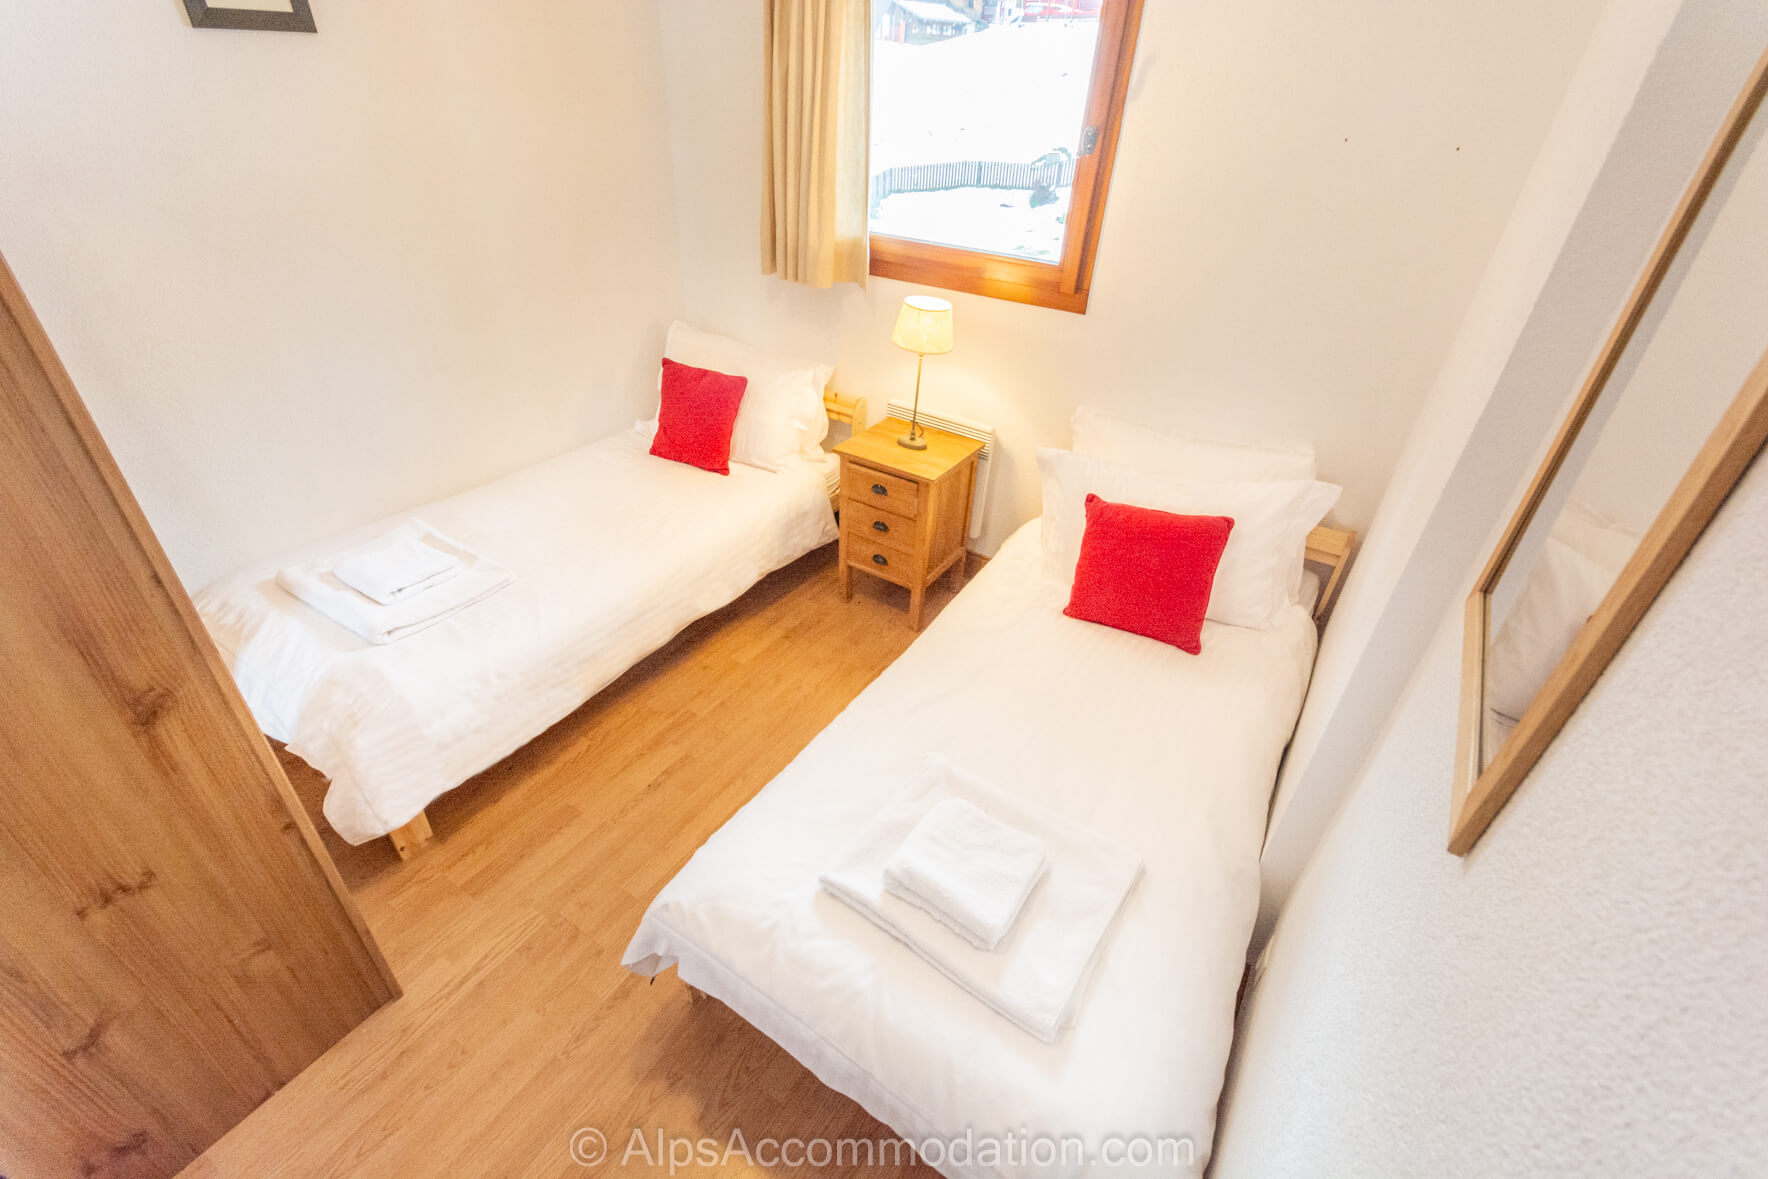 B11 Jardin Alpin Morillon 1100 - Comfortable twin or double bedroom with views towards the pistes